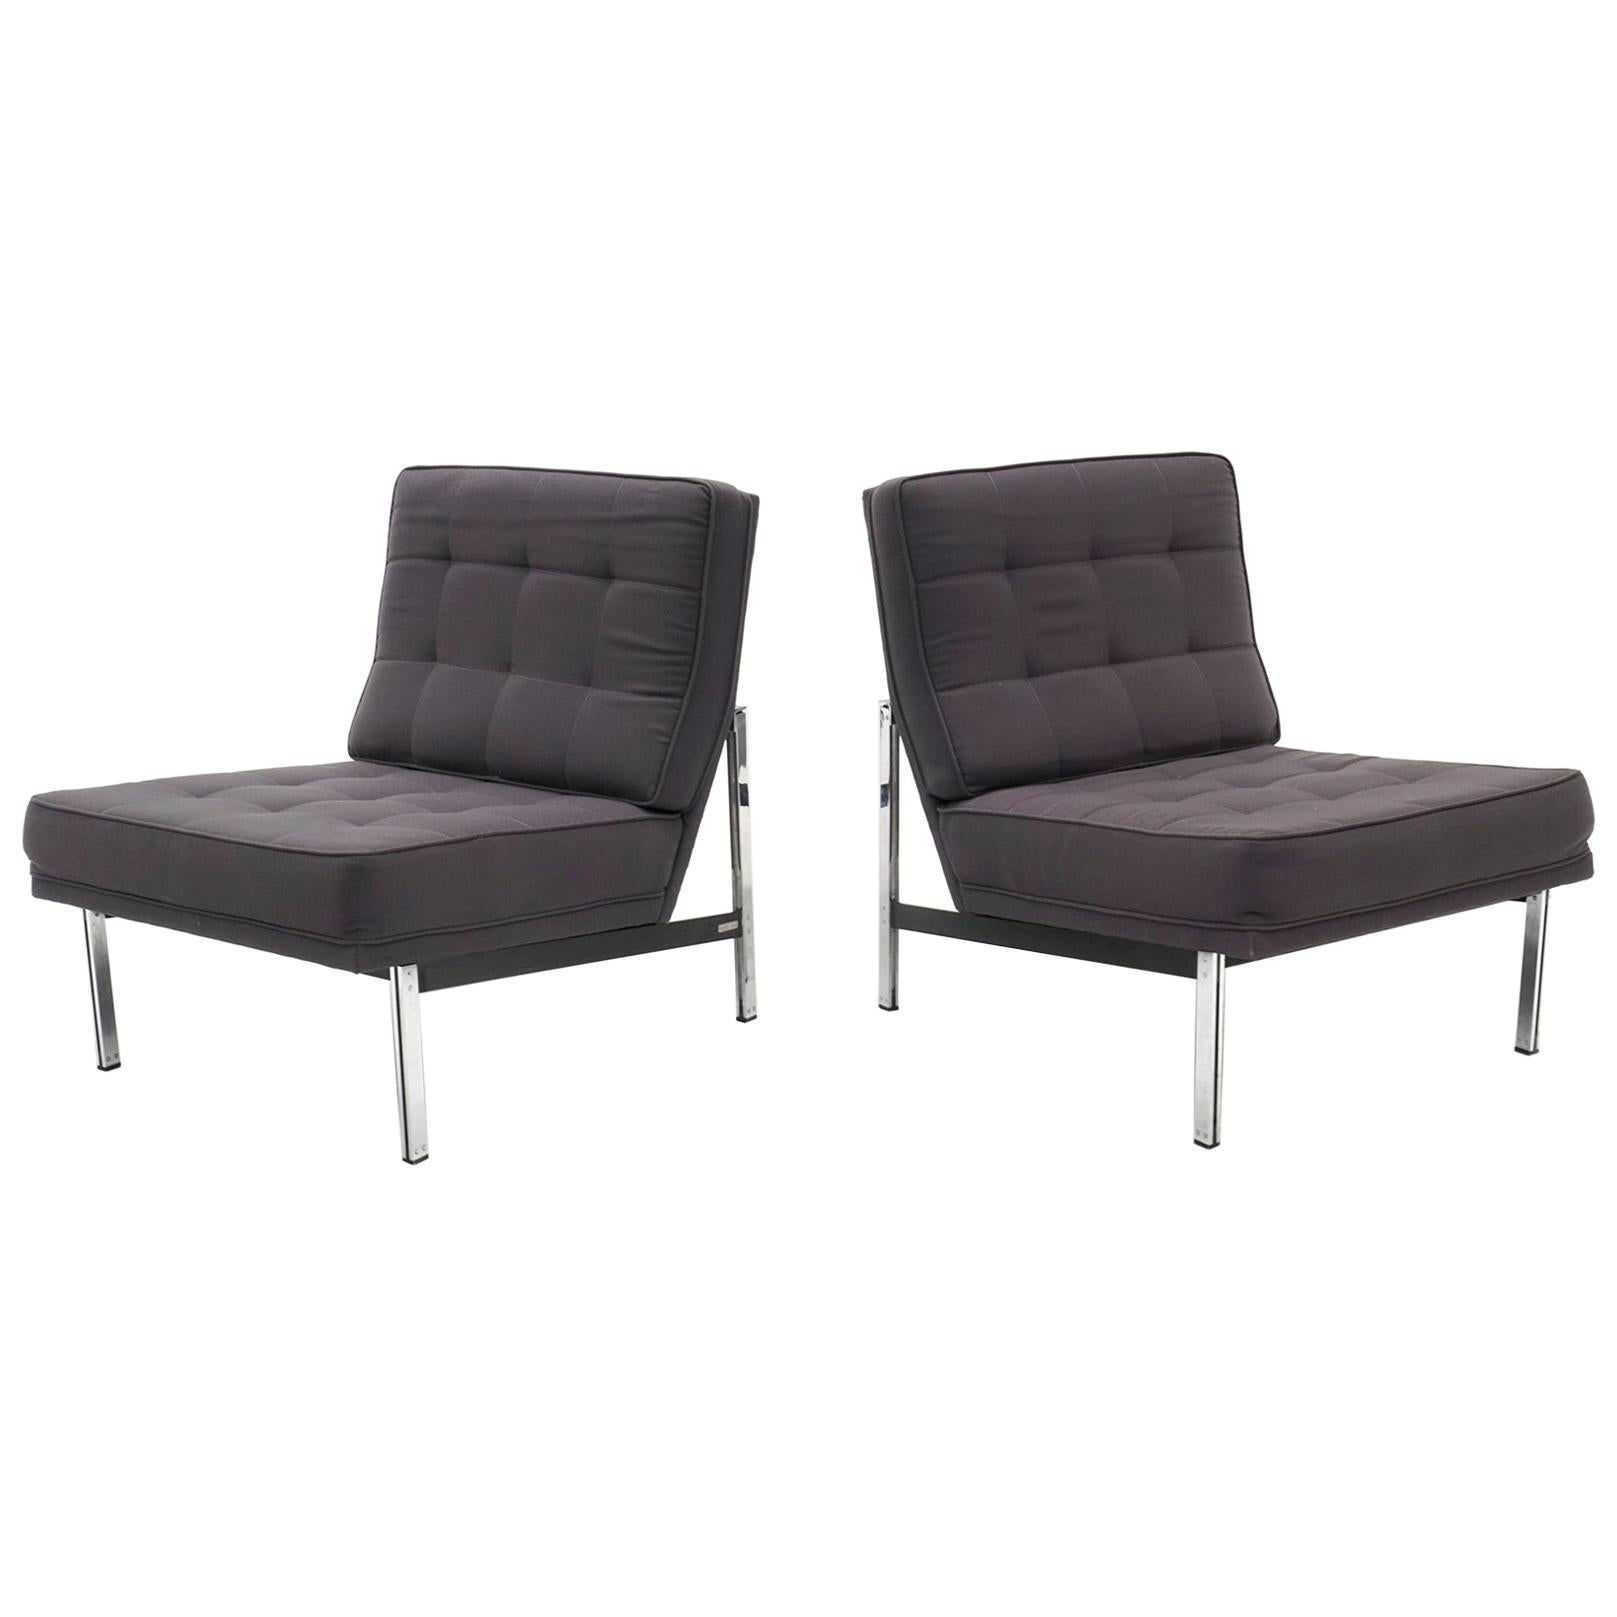 Pair of Armless Parallel Bar Lounge Chairs by Florence Knoll, Gray Fabric Chrome